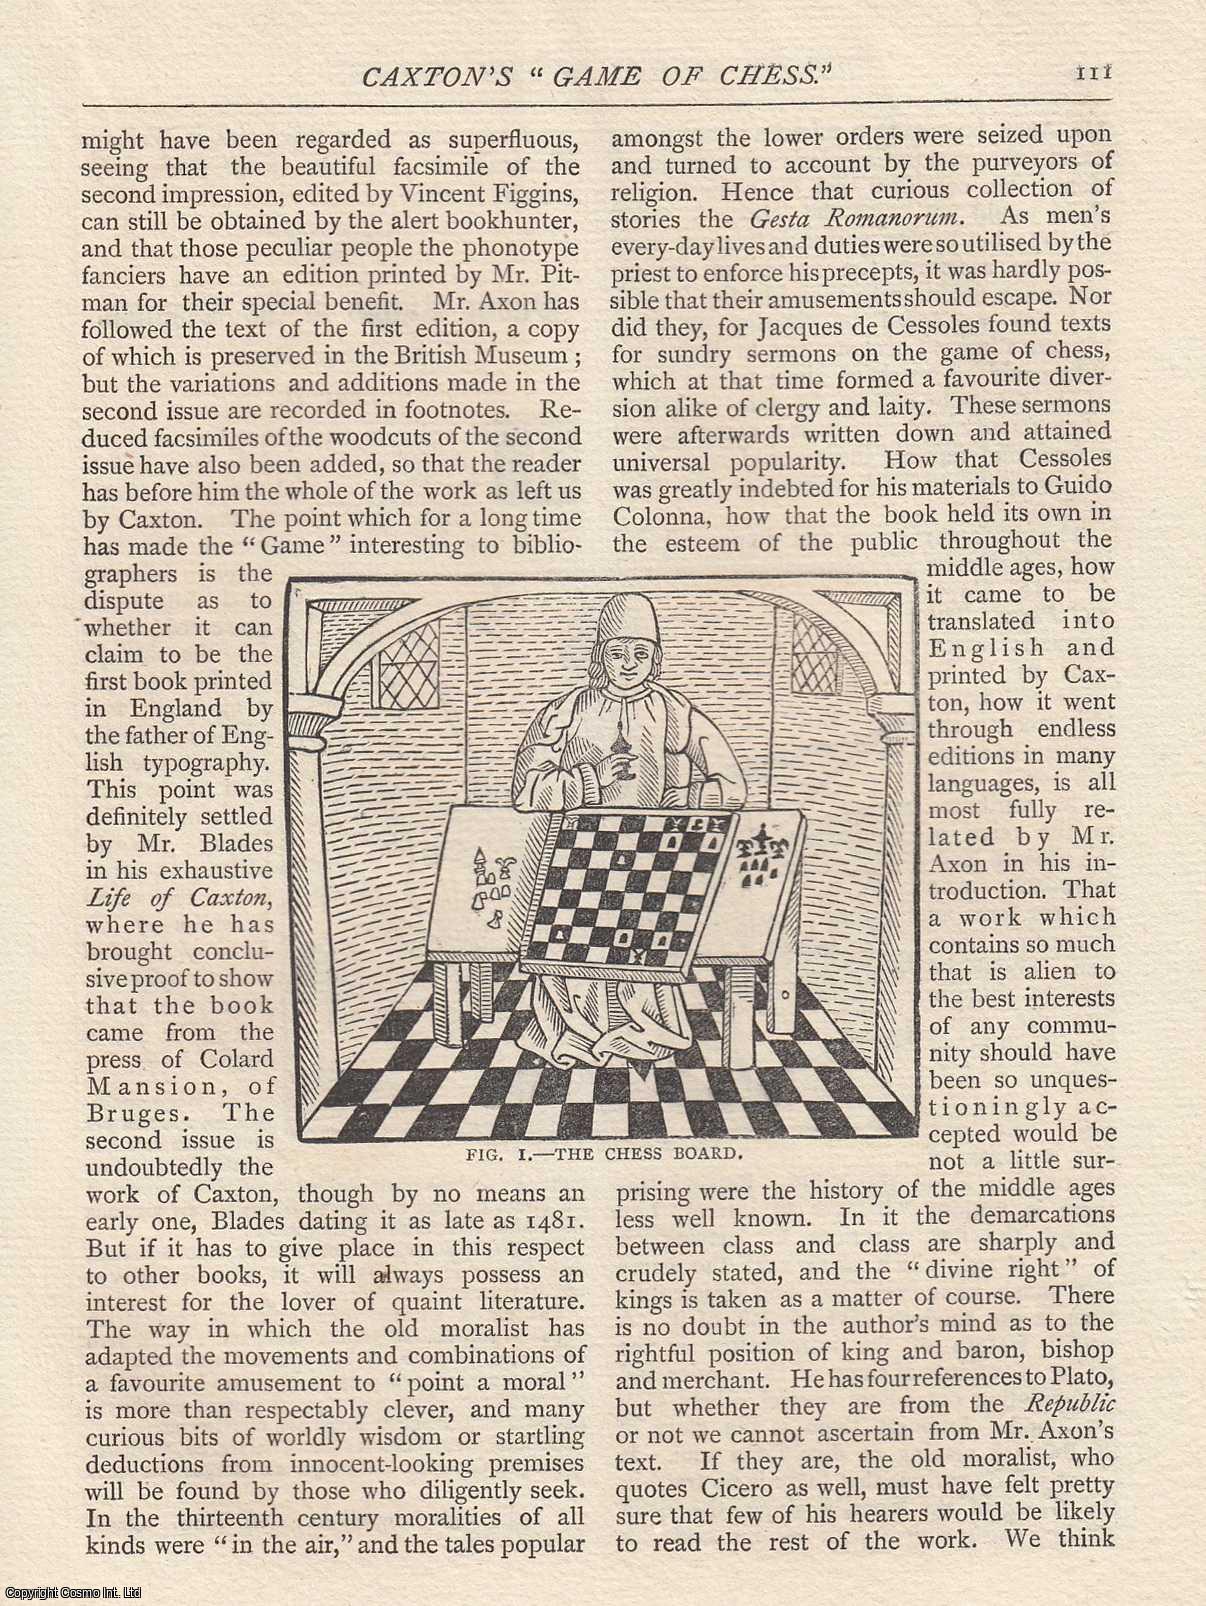 William E. A. Axon - Caxton's Game of Chess. An original article from The Antiquary Magazine, 1883.